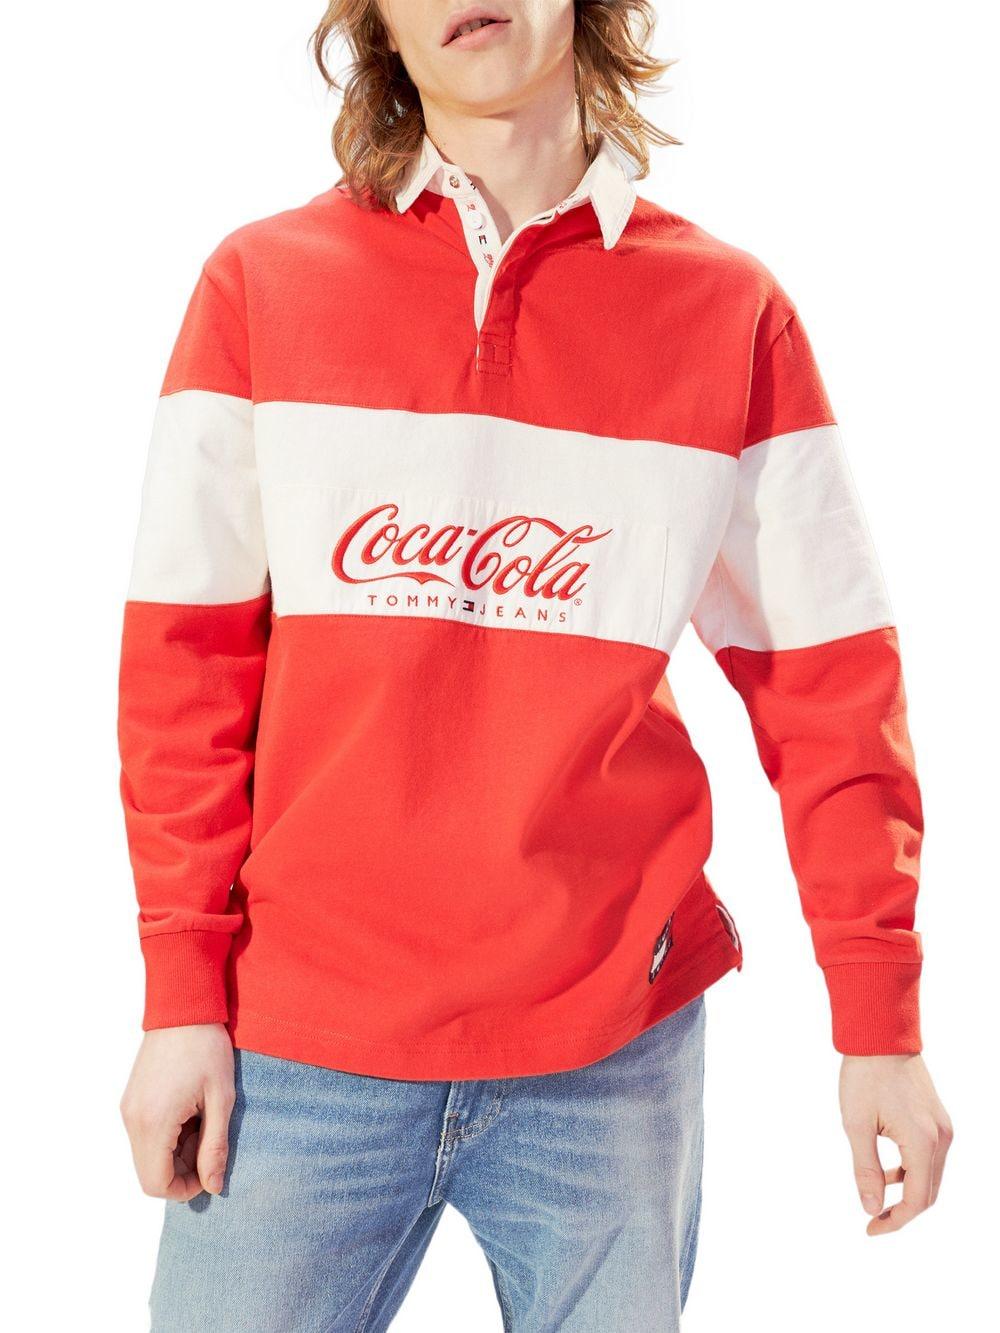 Tommy Hilfiger Denim Tommy X Coca Cola Rugby Shirt in Red for Men | Lyst